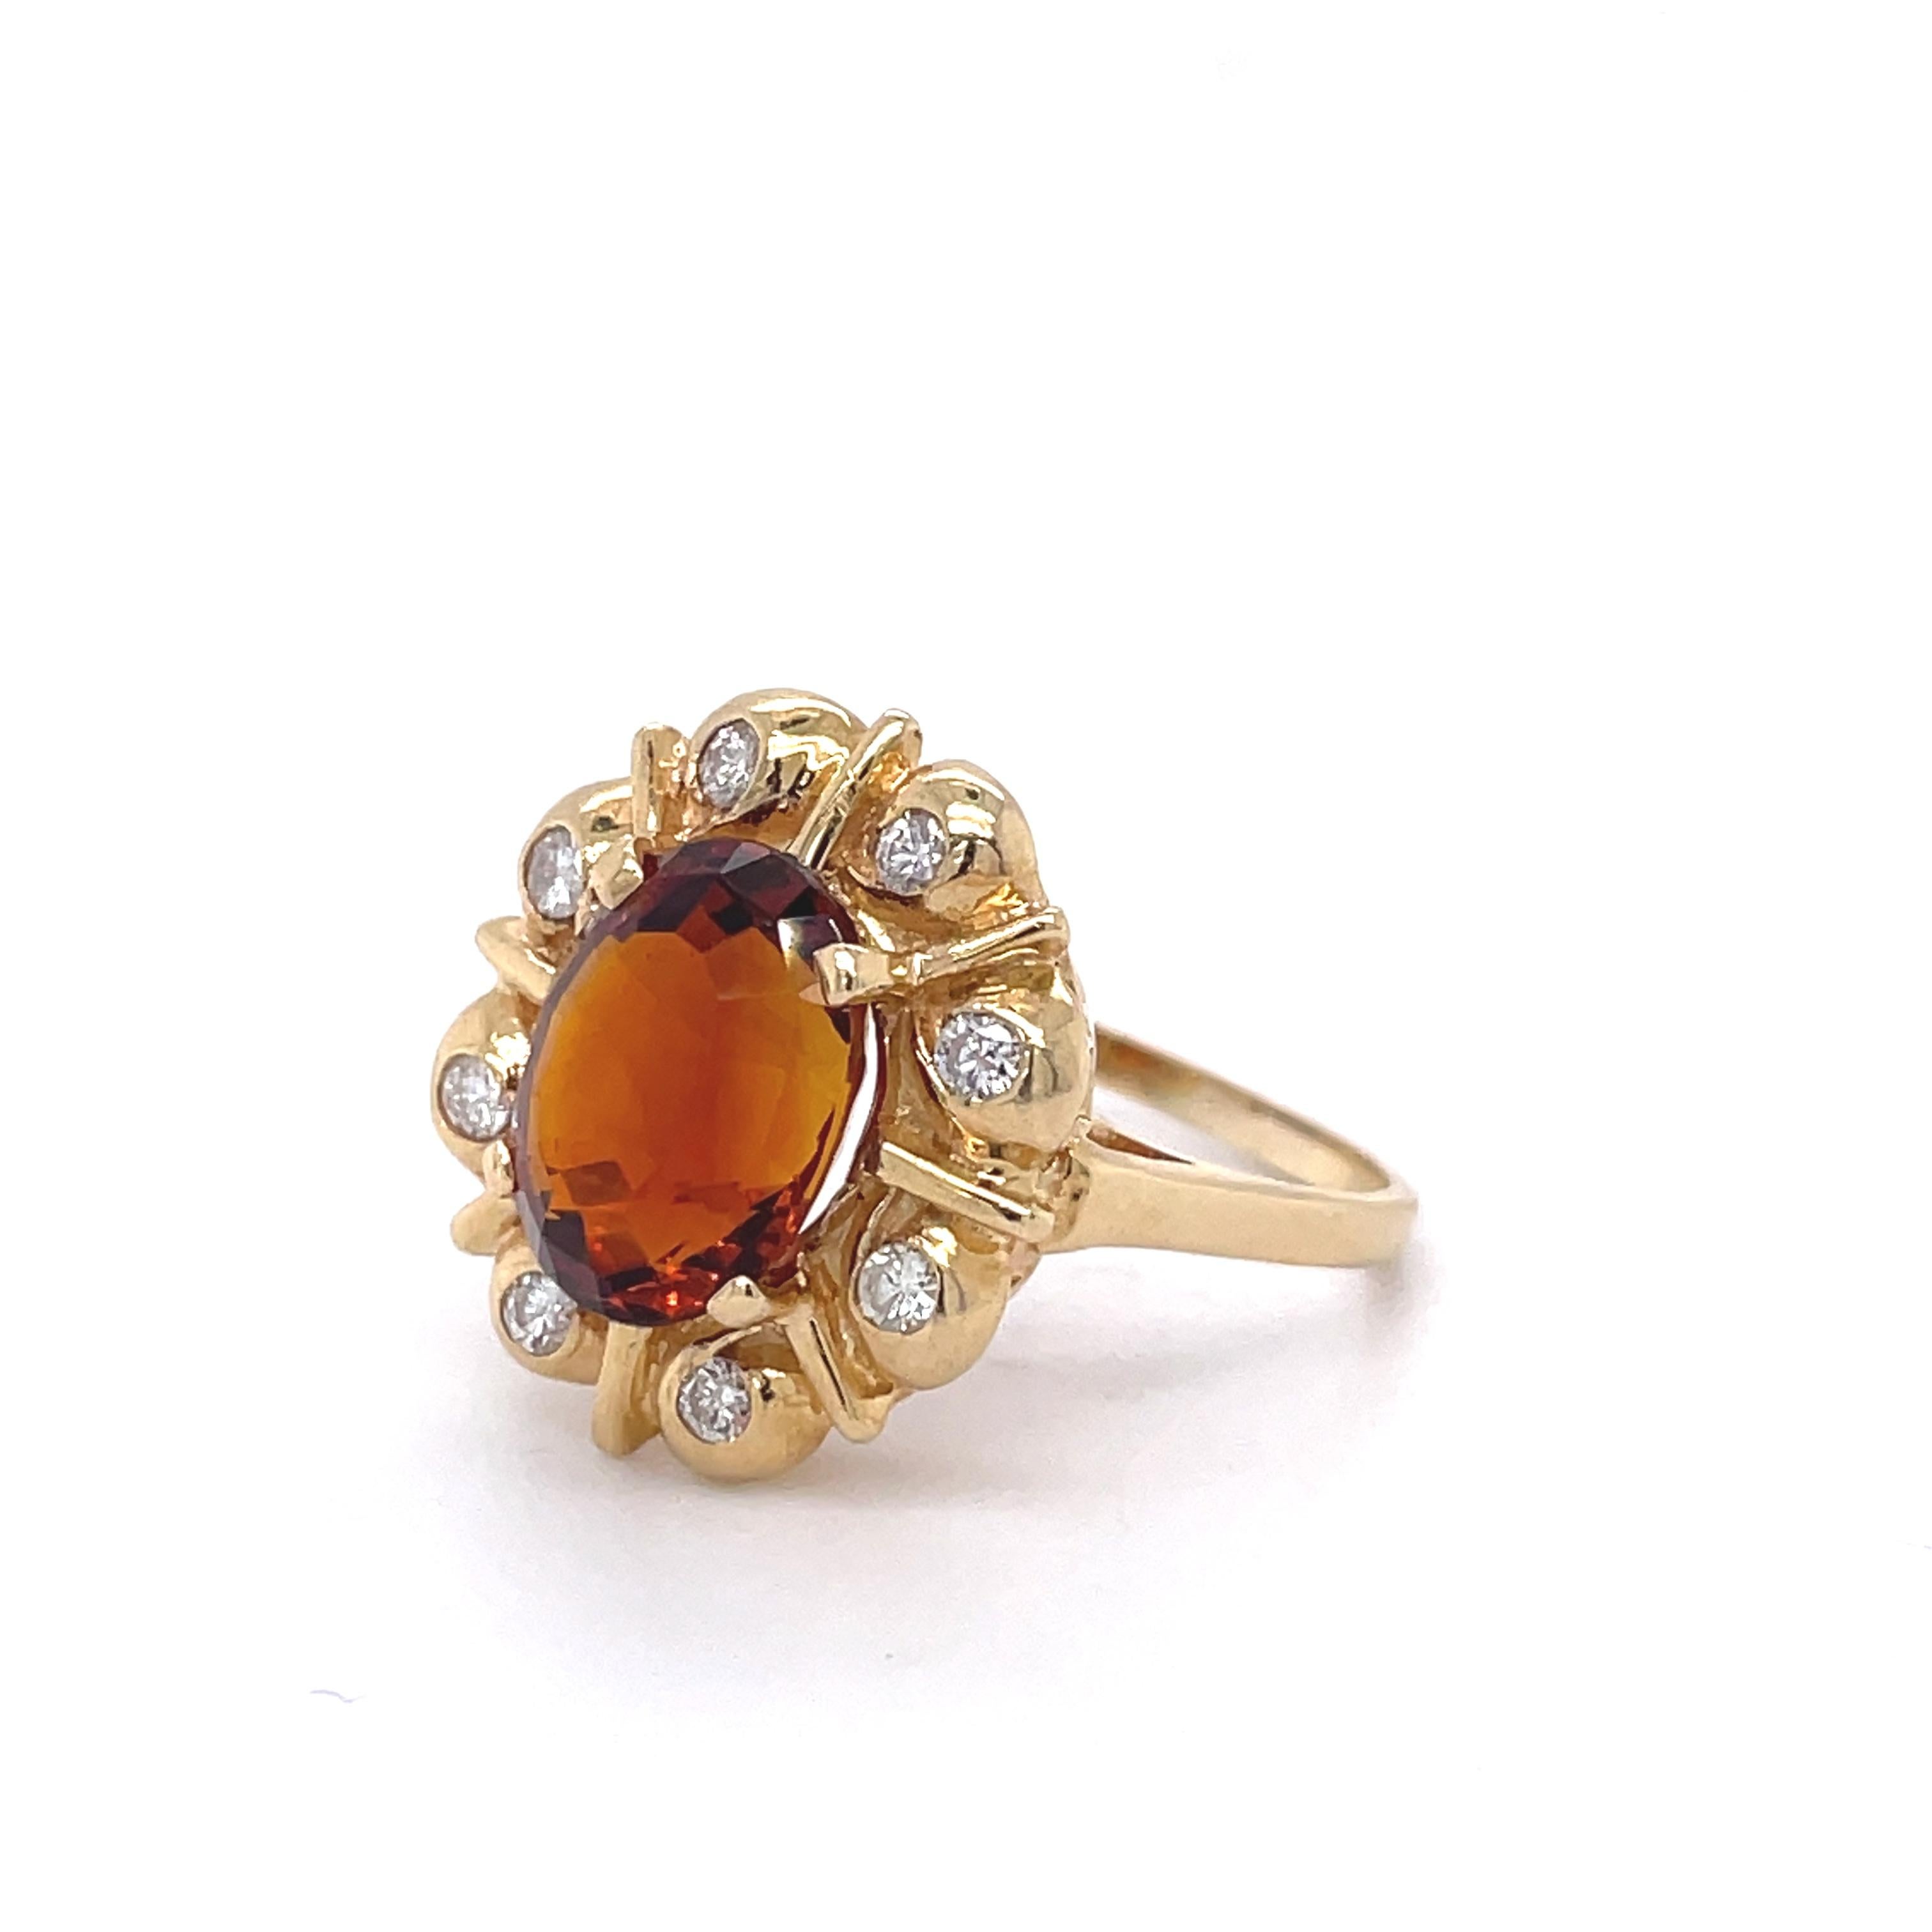 Topaz and Diamond Vintage Ring 5 Ct Oval Topaz, 10k Yellow Gold, Cocktail Ring For Sale 3